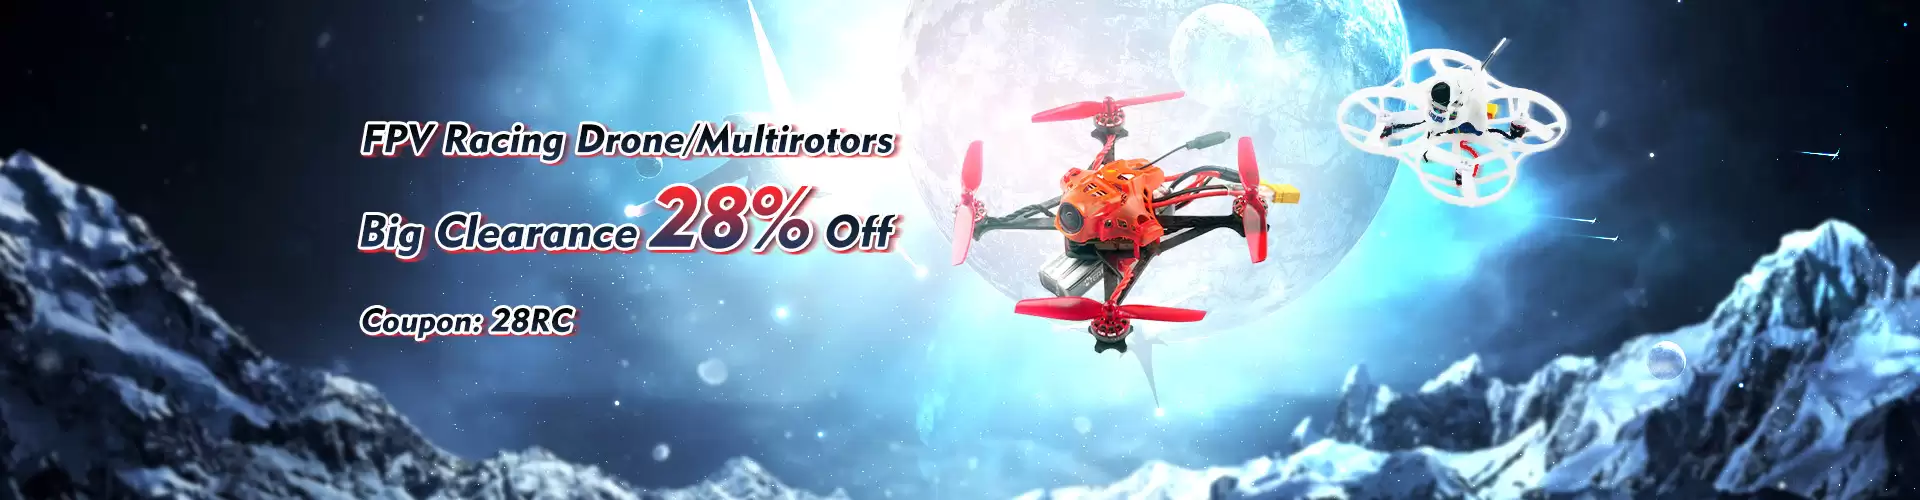 Take 28% Off On Fpv Racing Drone/multirotorsrnbig Clearance With This Coupon At Banggood